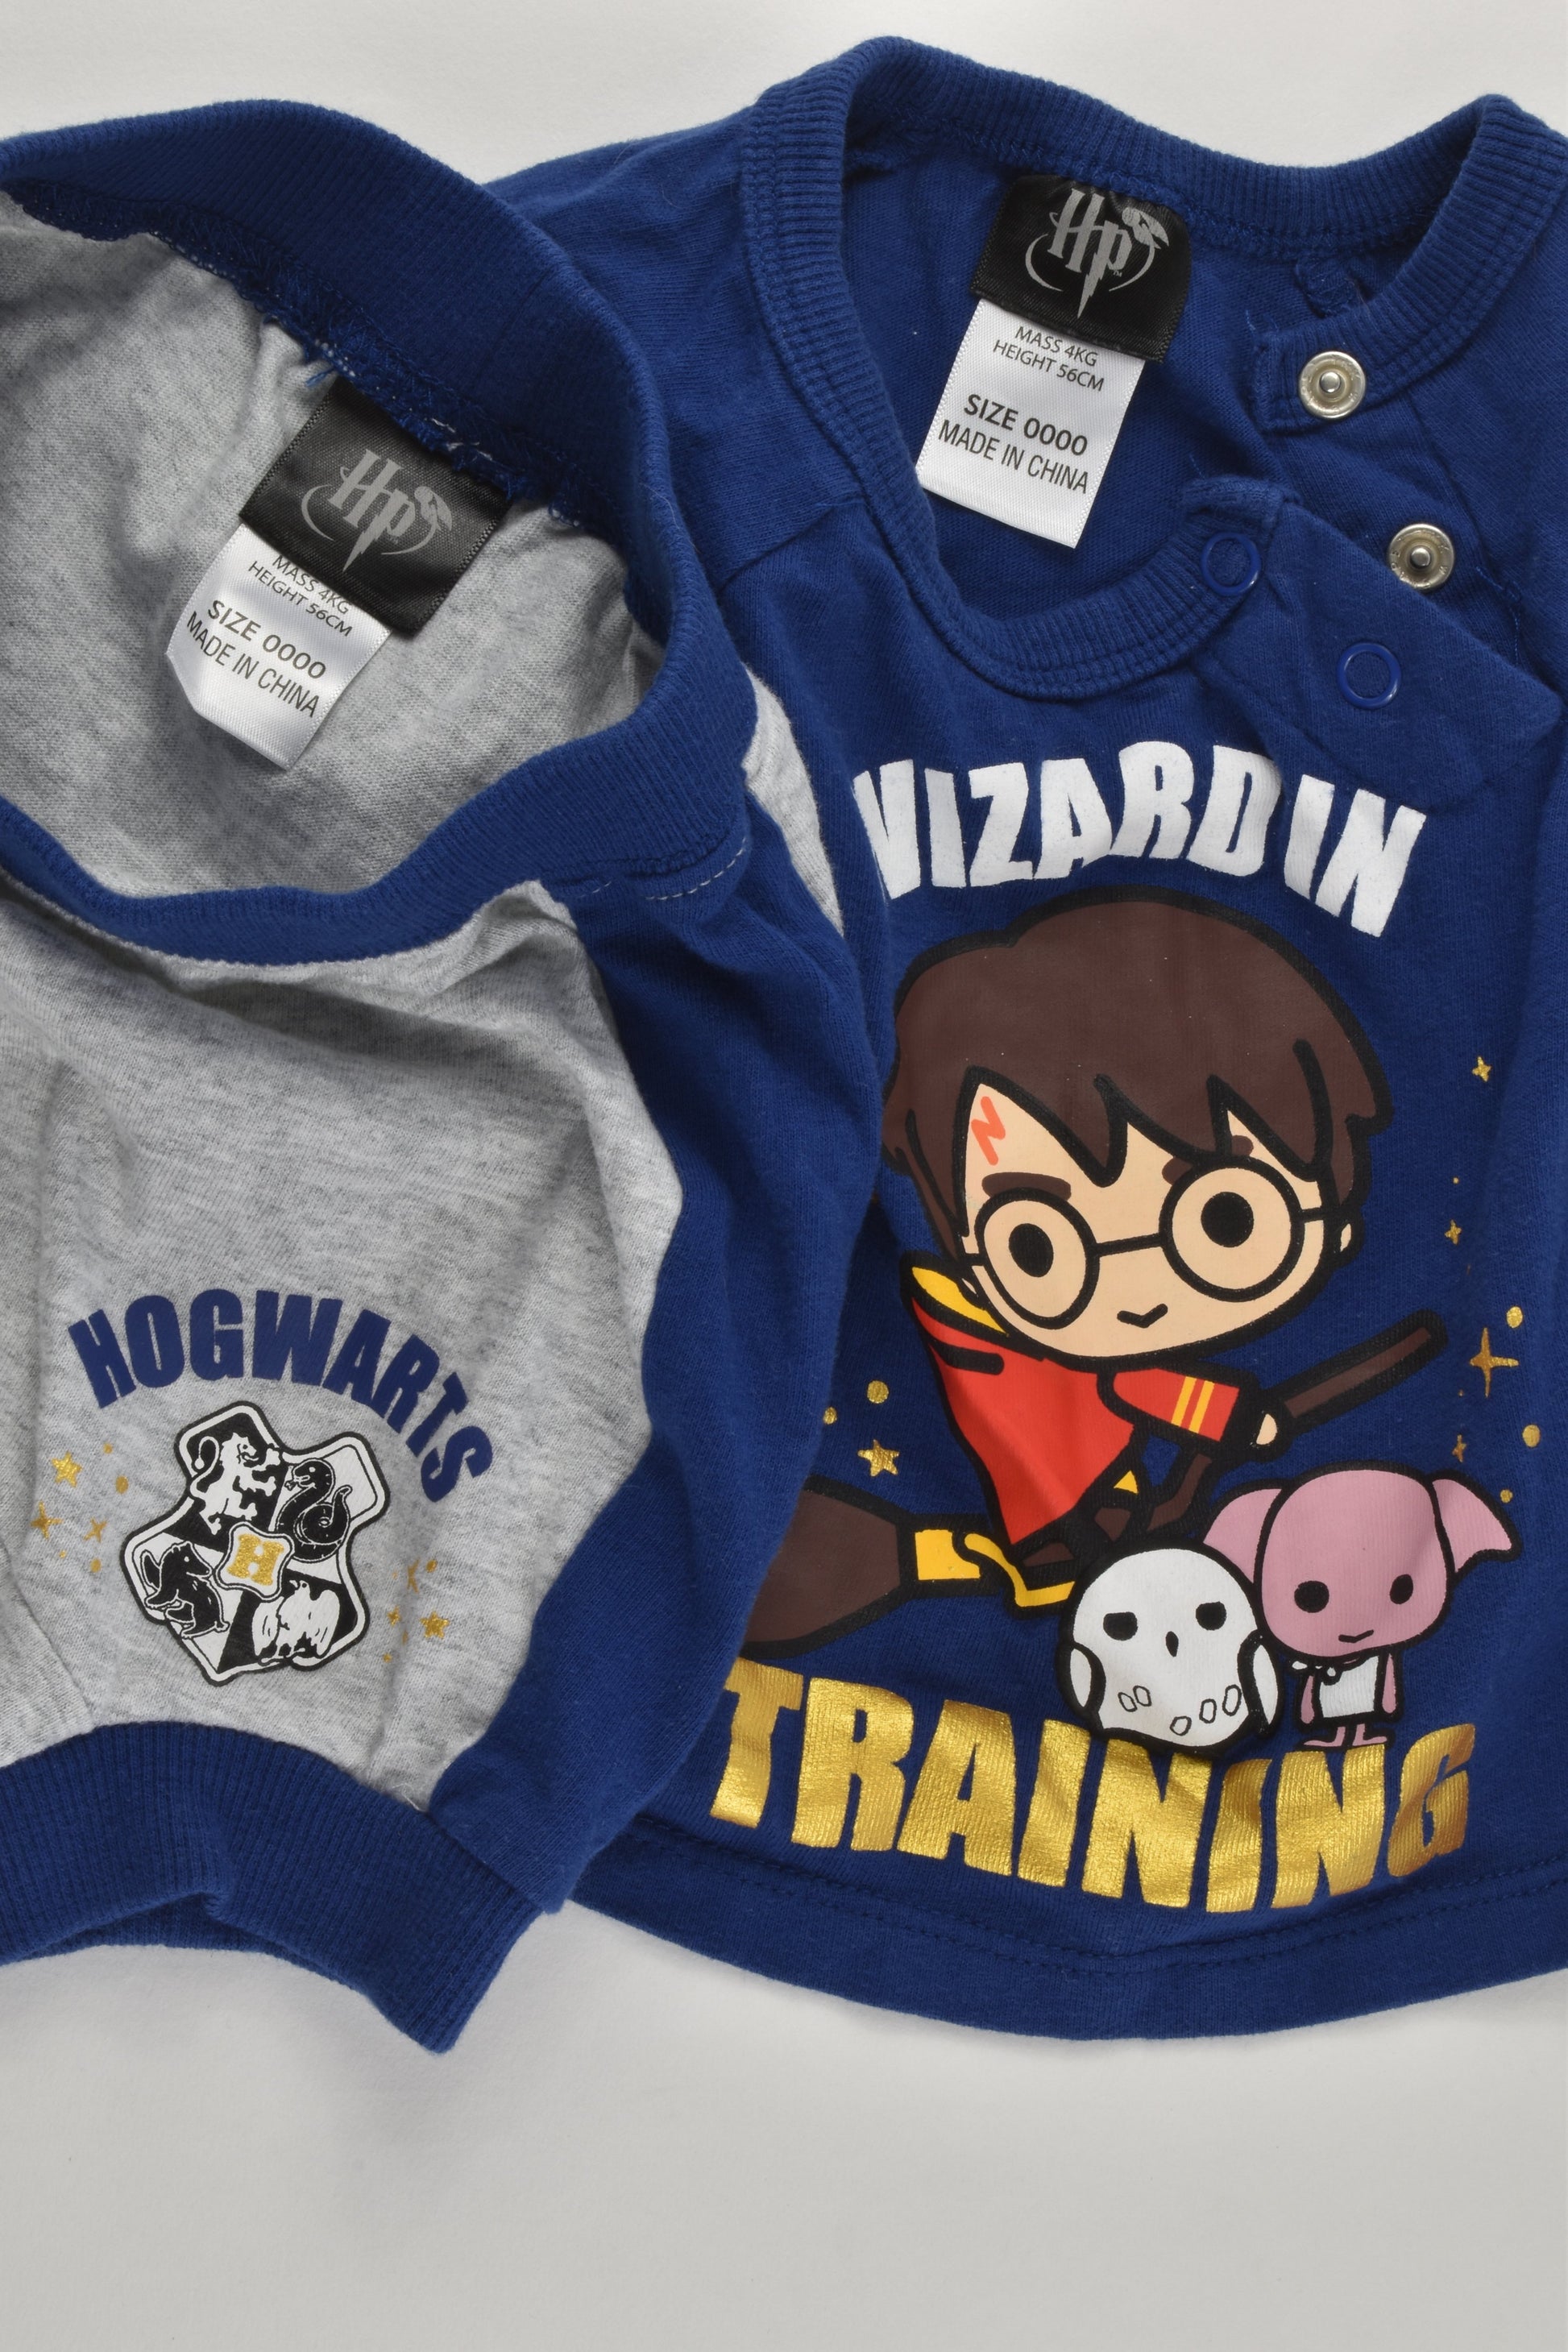 Harry Potter Size 0000 (56 cm) 'Wizard In Training' Outfit